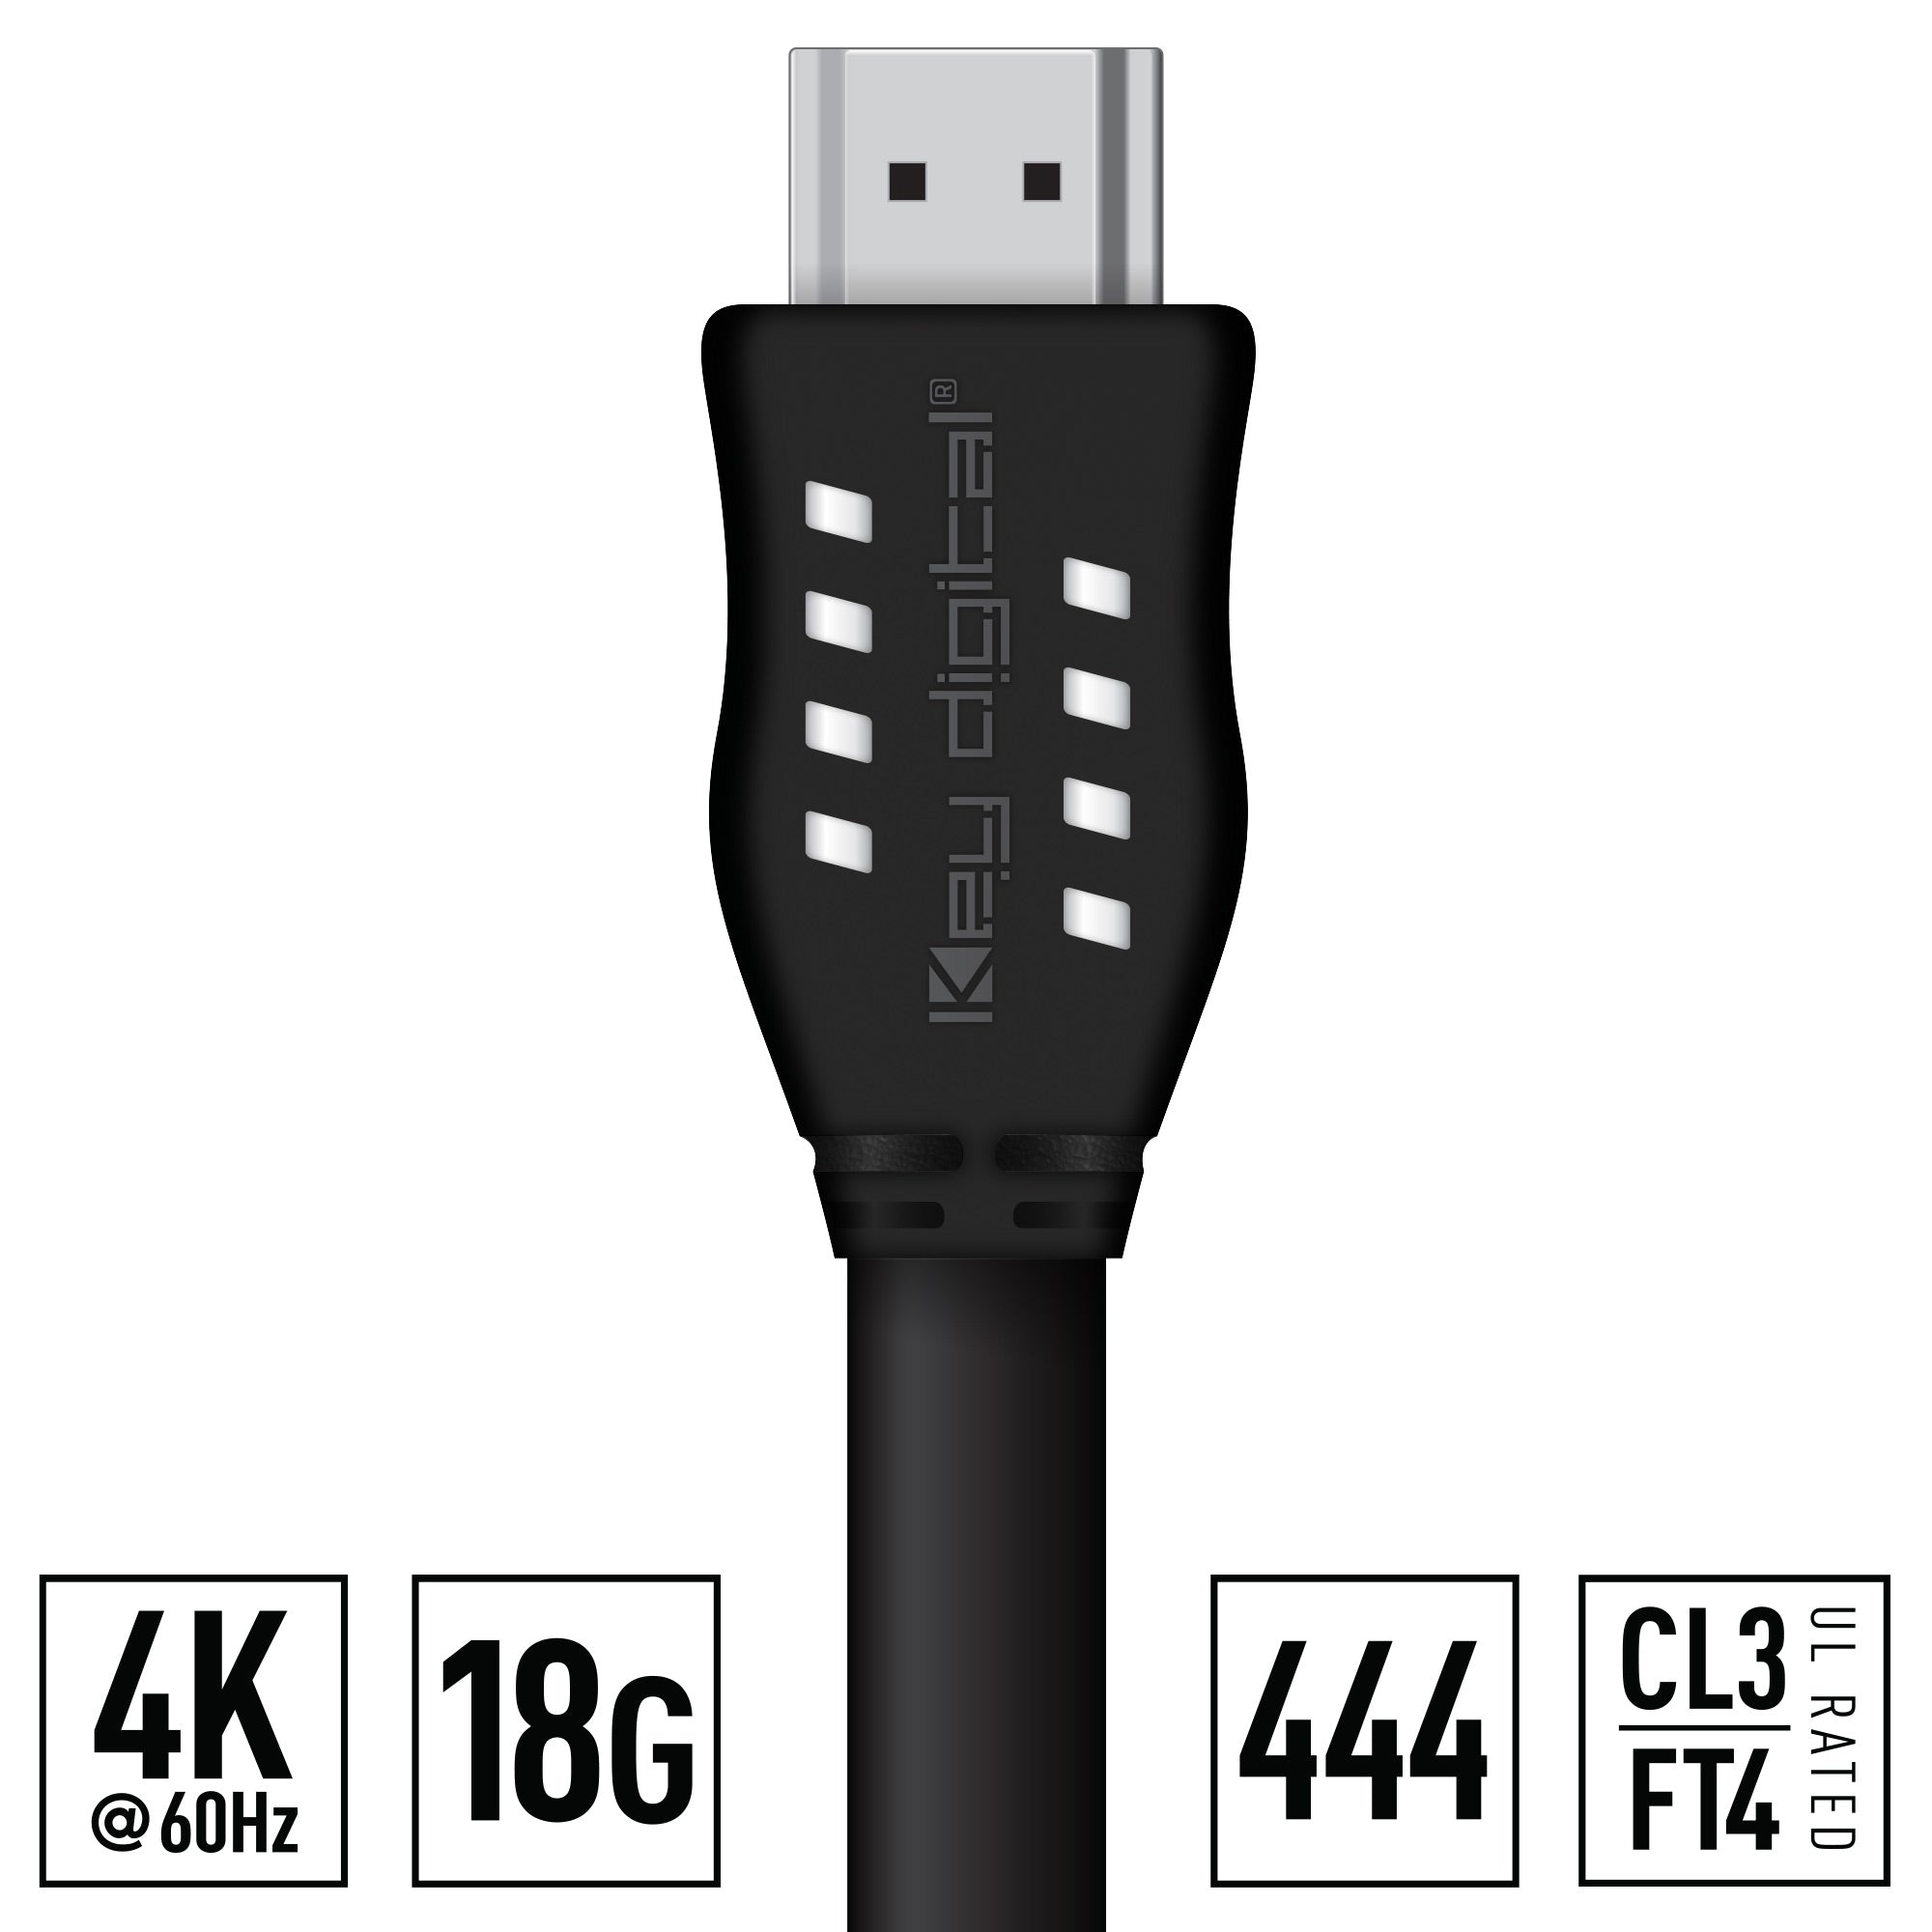 Key Digital 16FT HDMI Cable (4K/18G/444/60Hz/HDR10/HDCP2.2/CL3/FT4, 26AWG) - KD-Pro16